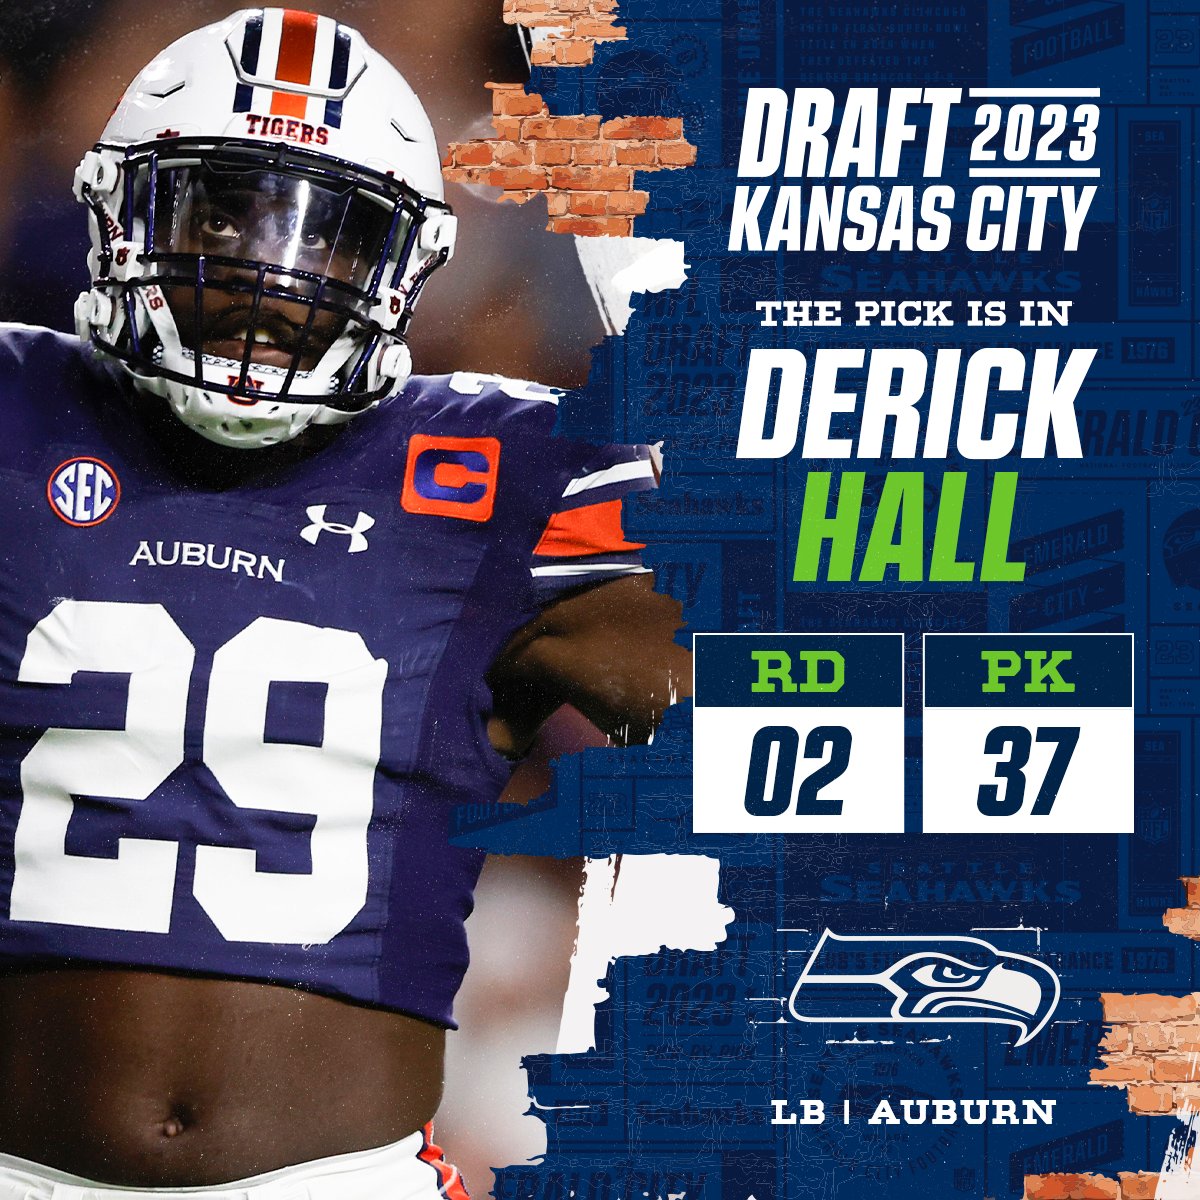 With the No. 37 overall pick in the 2023 @NFLDraft, the @Seahawks select Derick Hall! 📺: 2023 #NFLDraft on NFLN/ESPN/ABC 📱: Stream on NFL+ bit.ly/3Nk9PrV